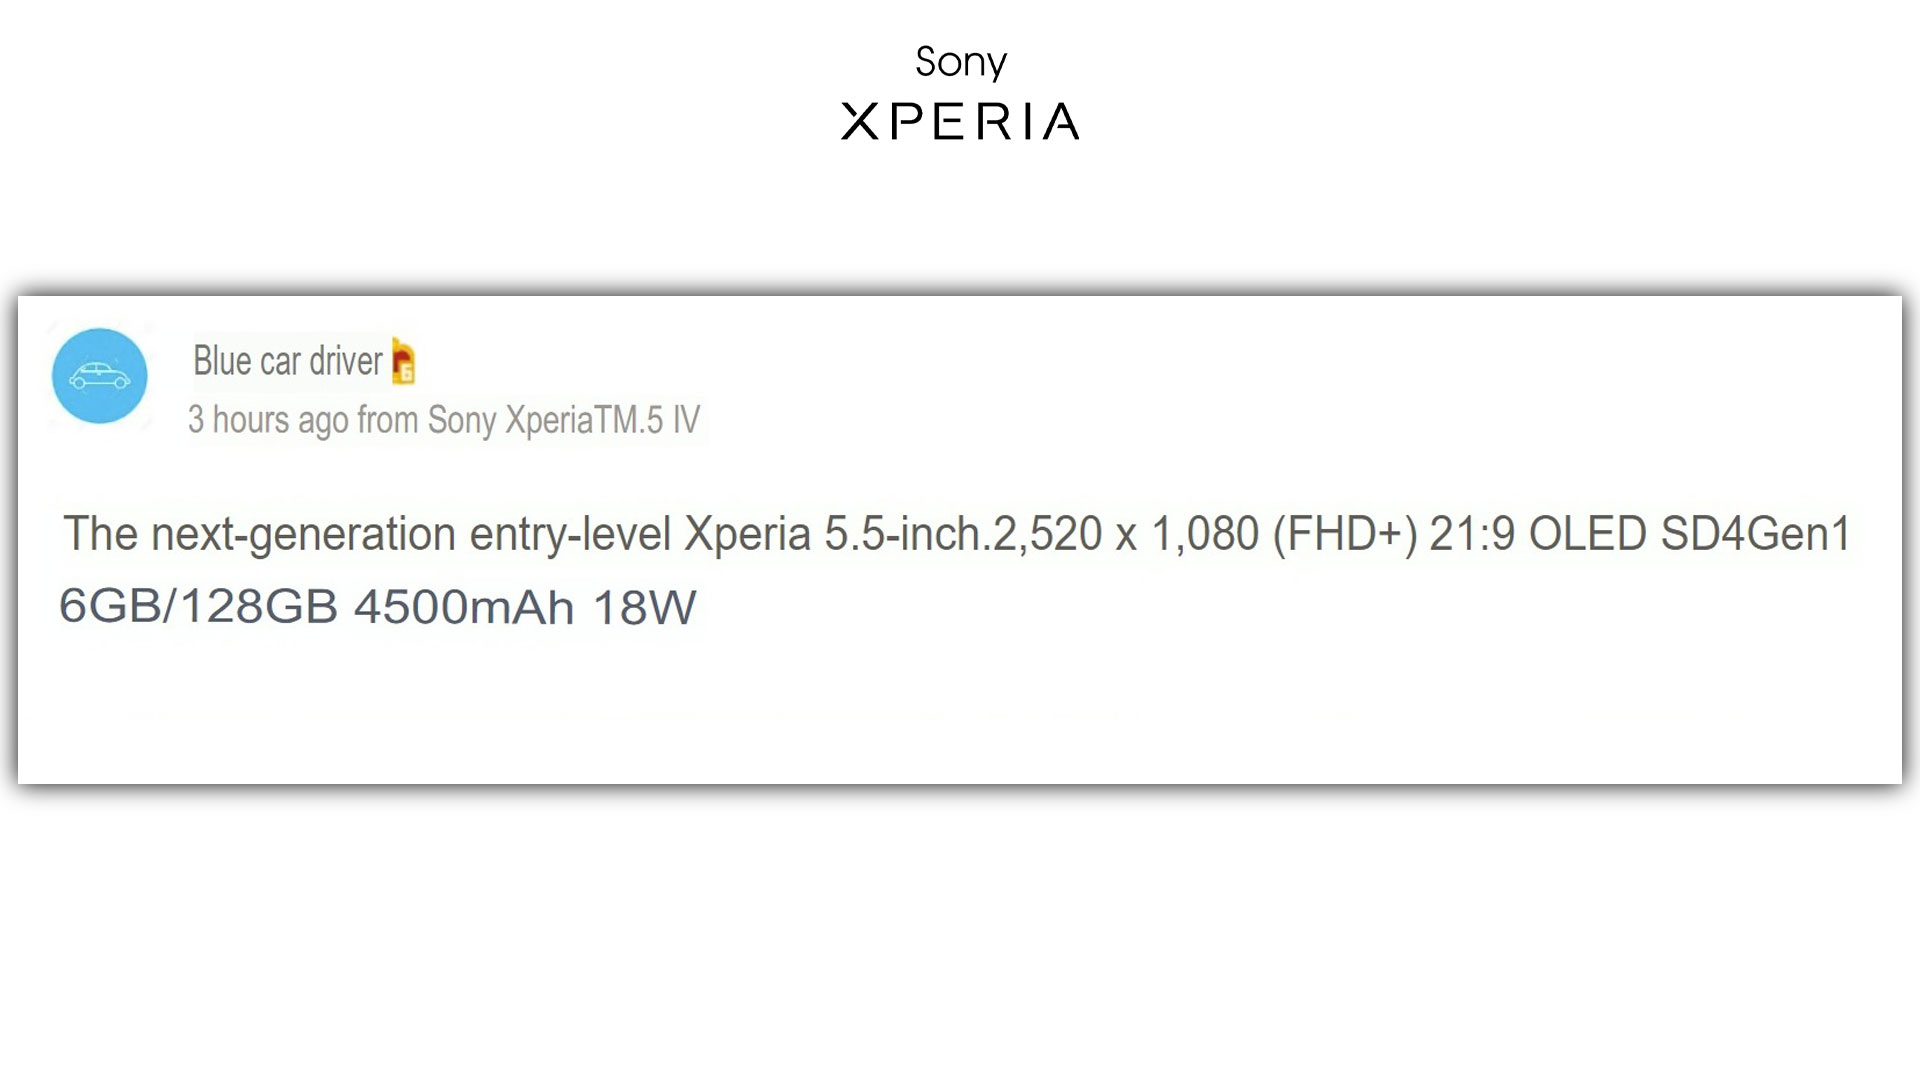 sony-xperia-tweet-about-next-generation-xperia